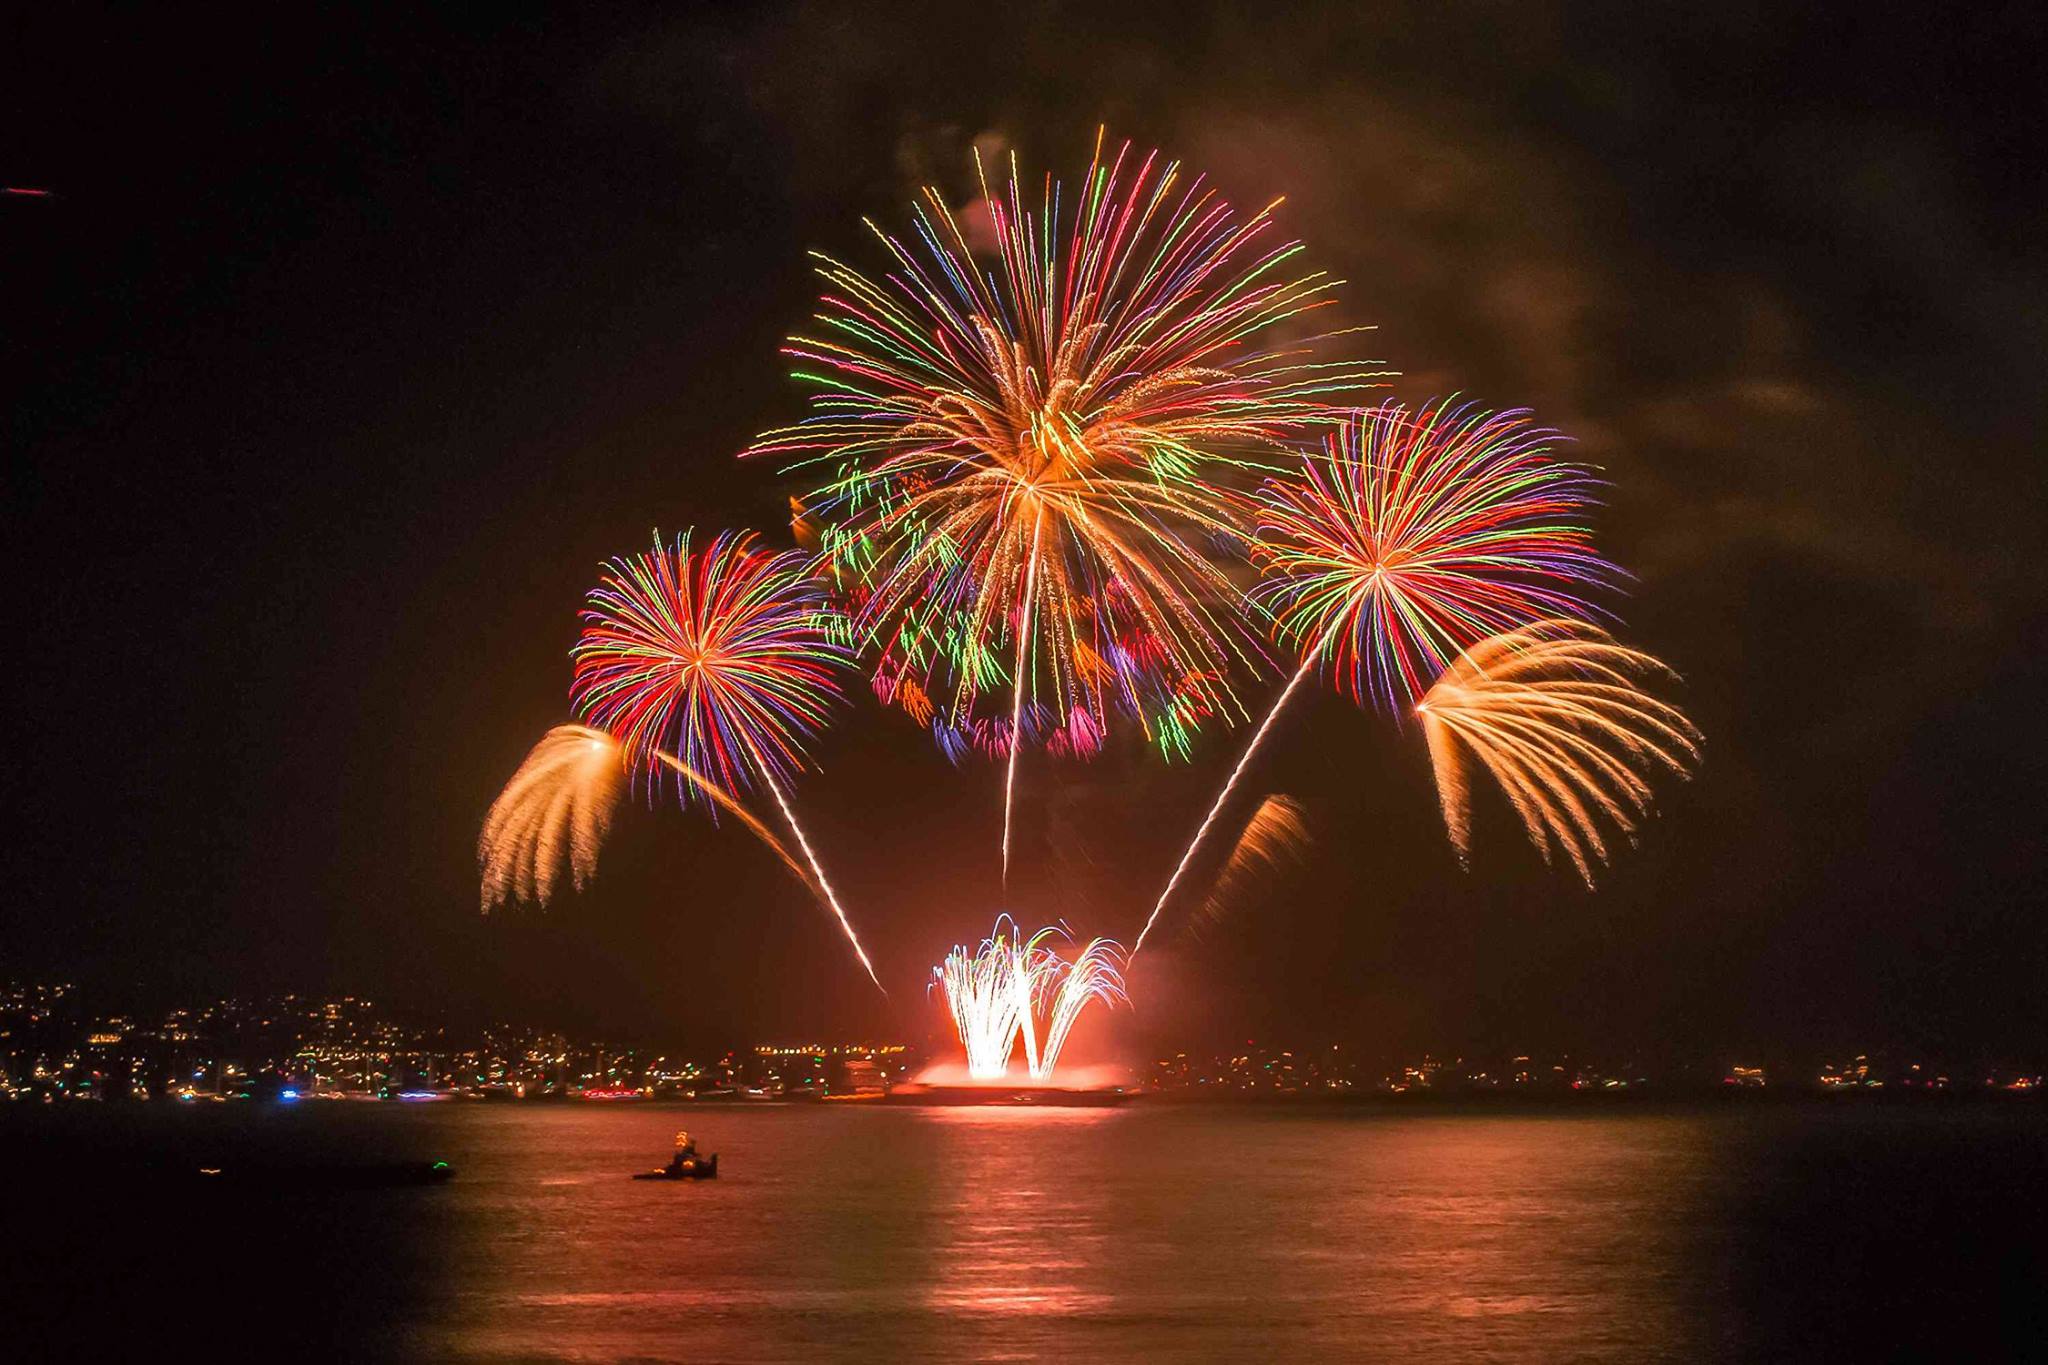 Colorful fireworks over still open water.